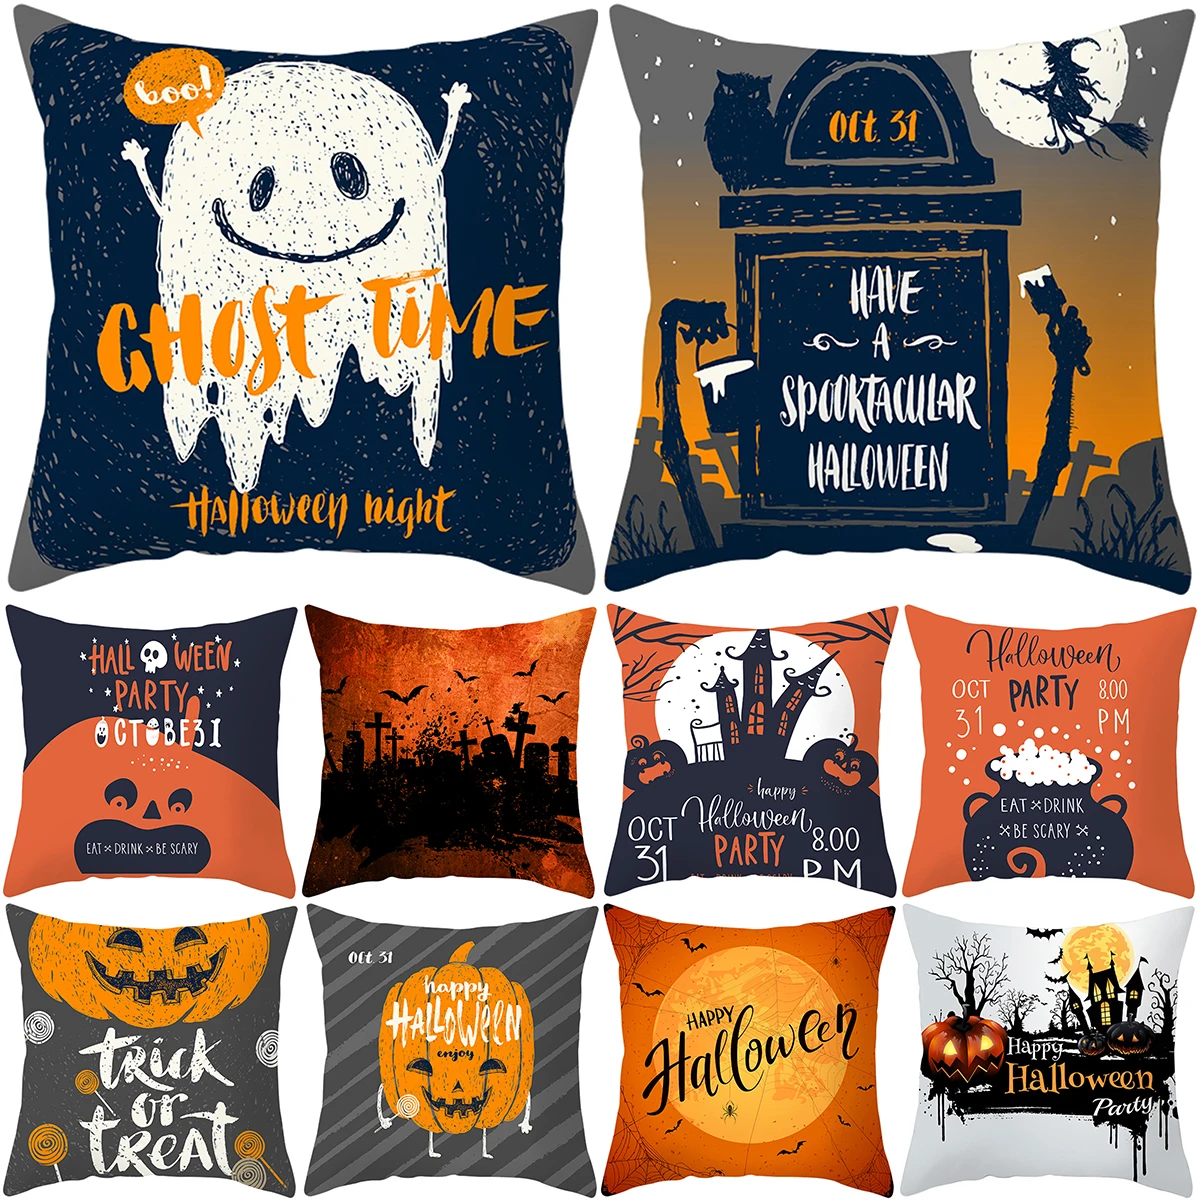 

Halloween Decorations Funny Printed Pillow Case 18x18 Inches Home Holiday Decor Cushion Cover Pumpkin Ghost Stripe Pillow Cover